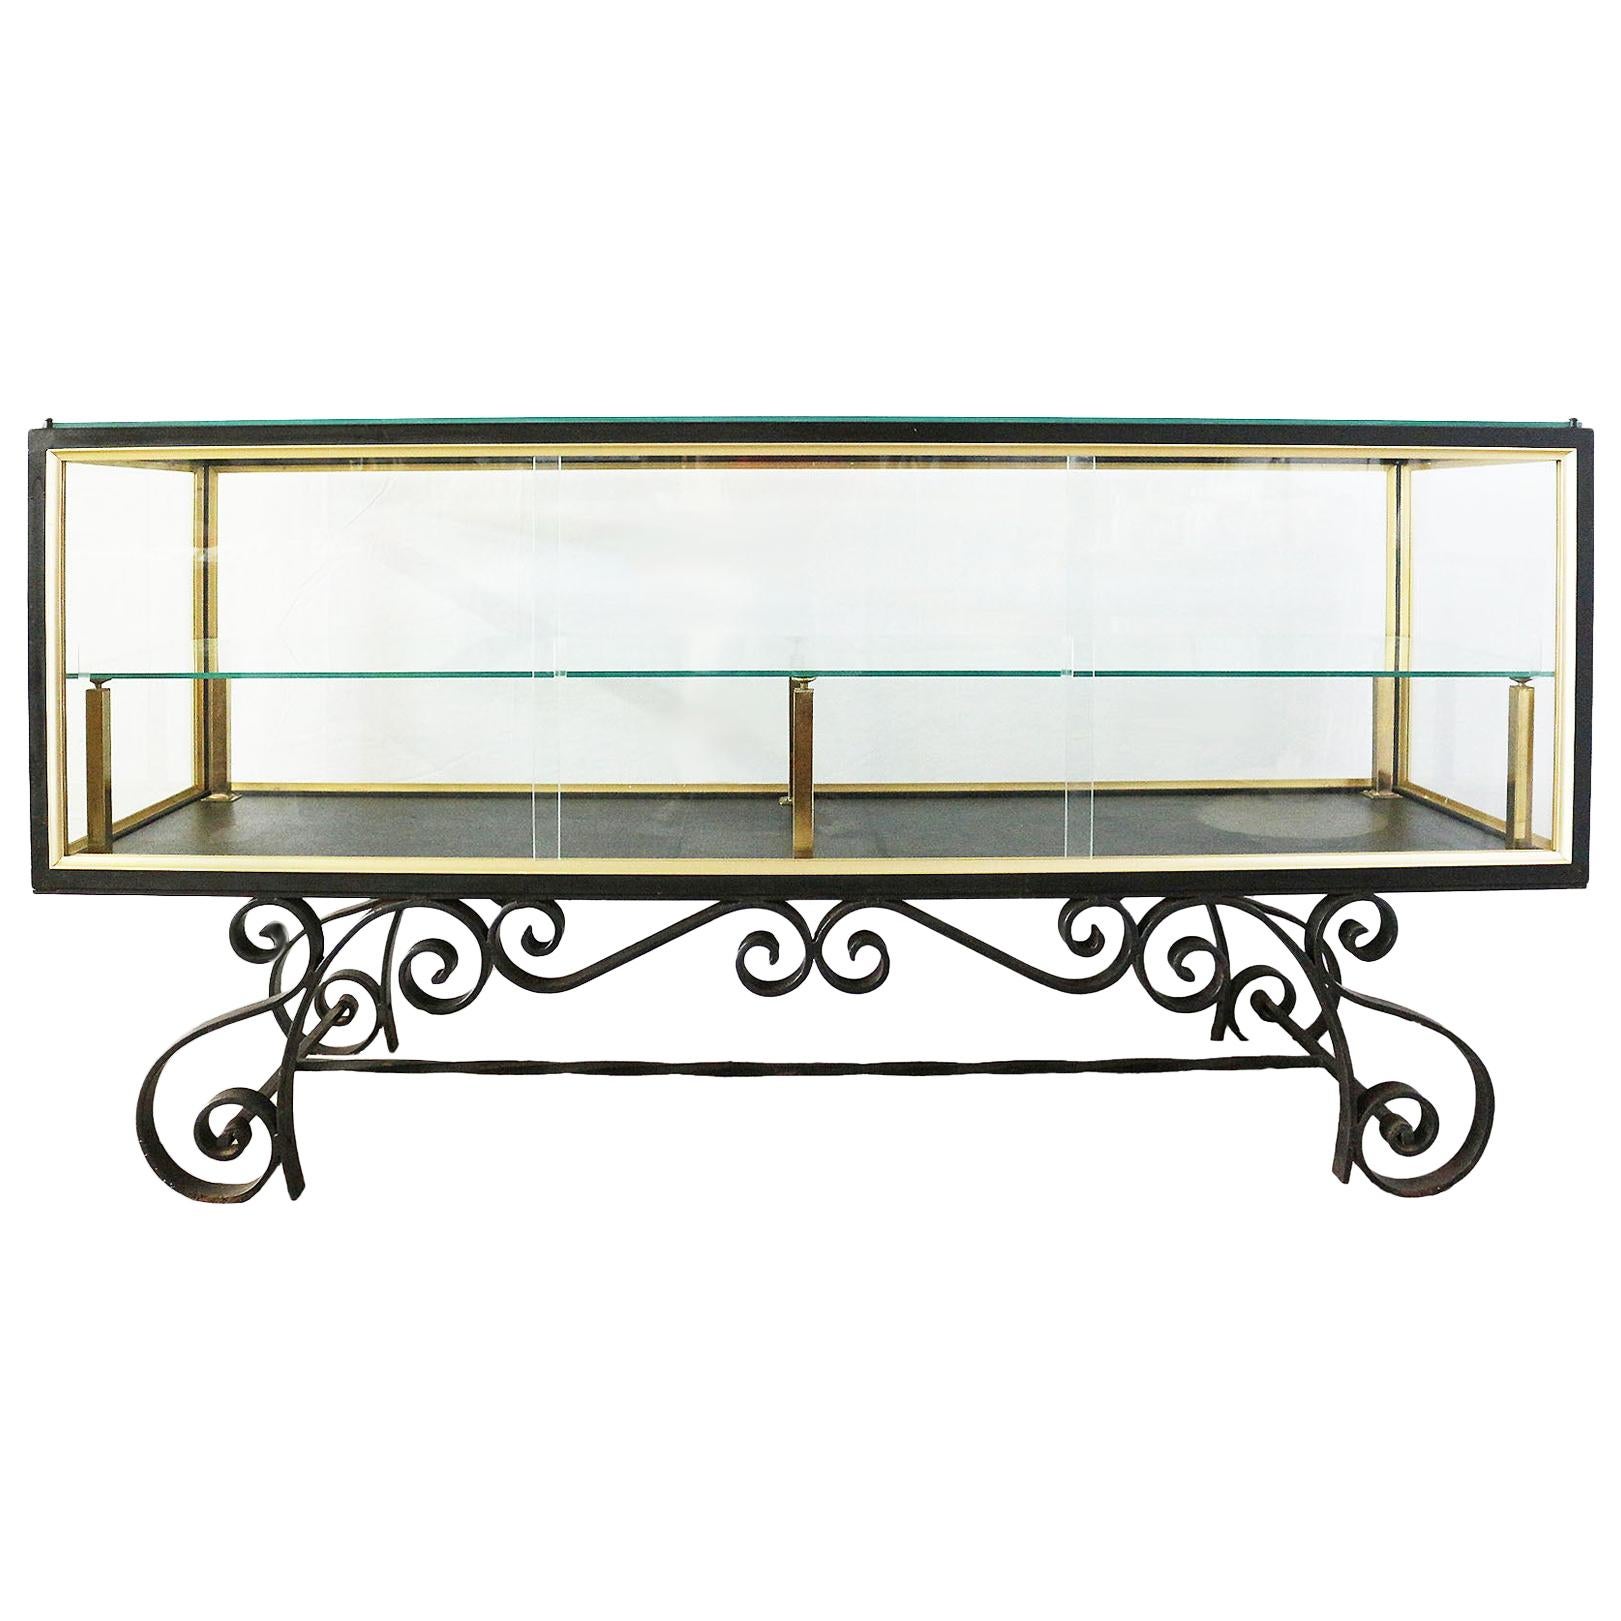 Midcentury Shop Counter Vitrine Display Cabinet French Glass Wrought Iron